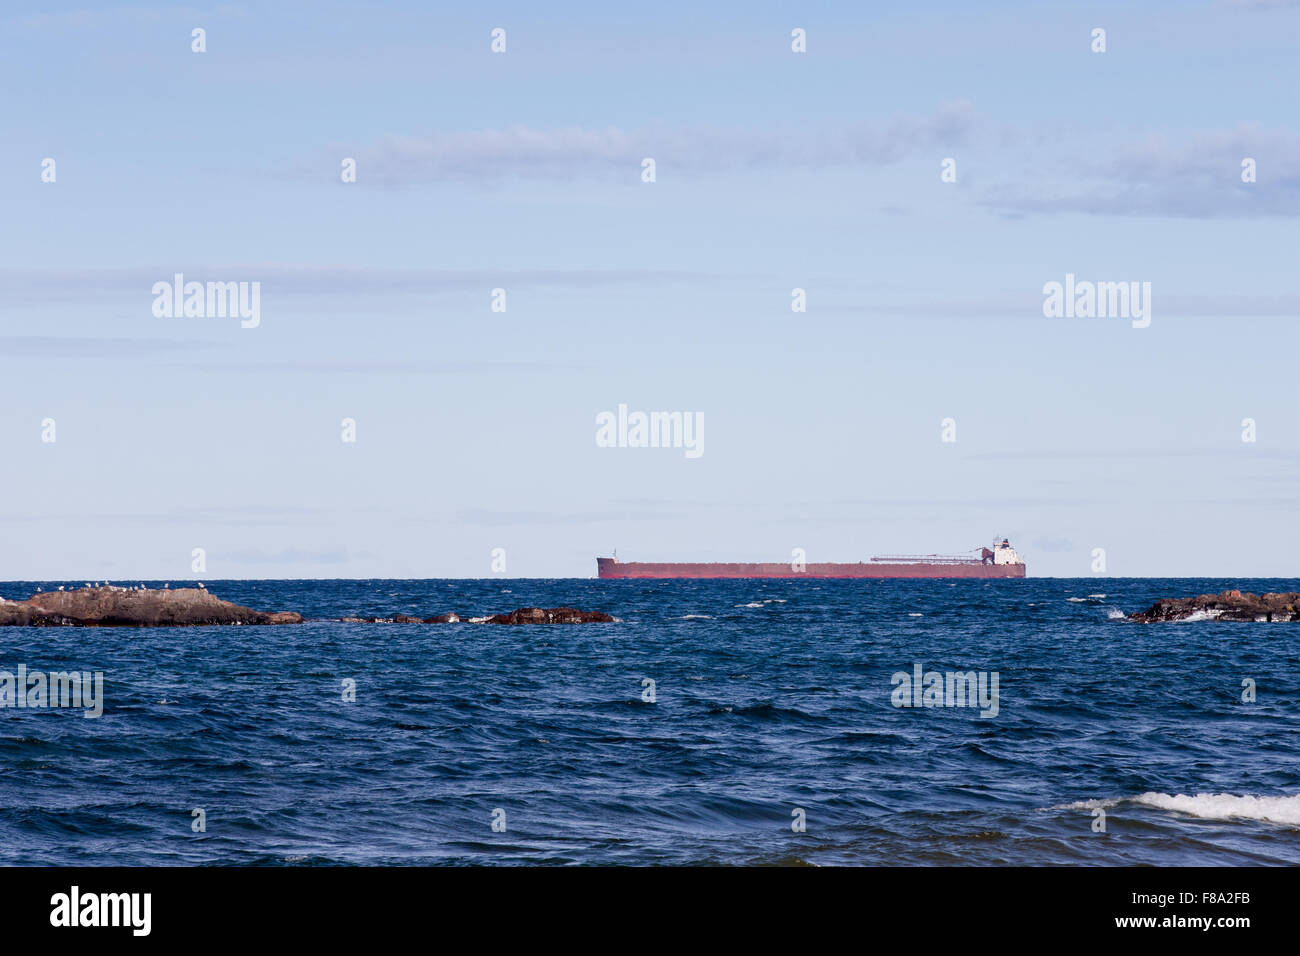 Great Lakes ore boat passing behind rocky outcroppings on Lake Superior.  Horizon is at the one-third line to allow for copy. Stock Photo